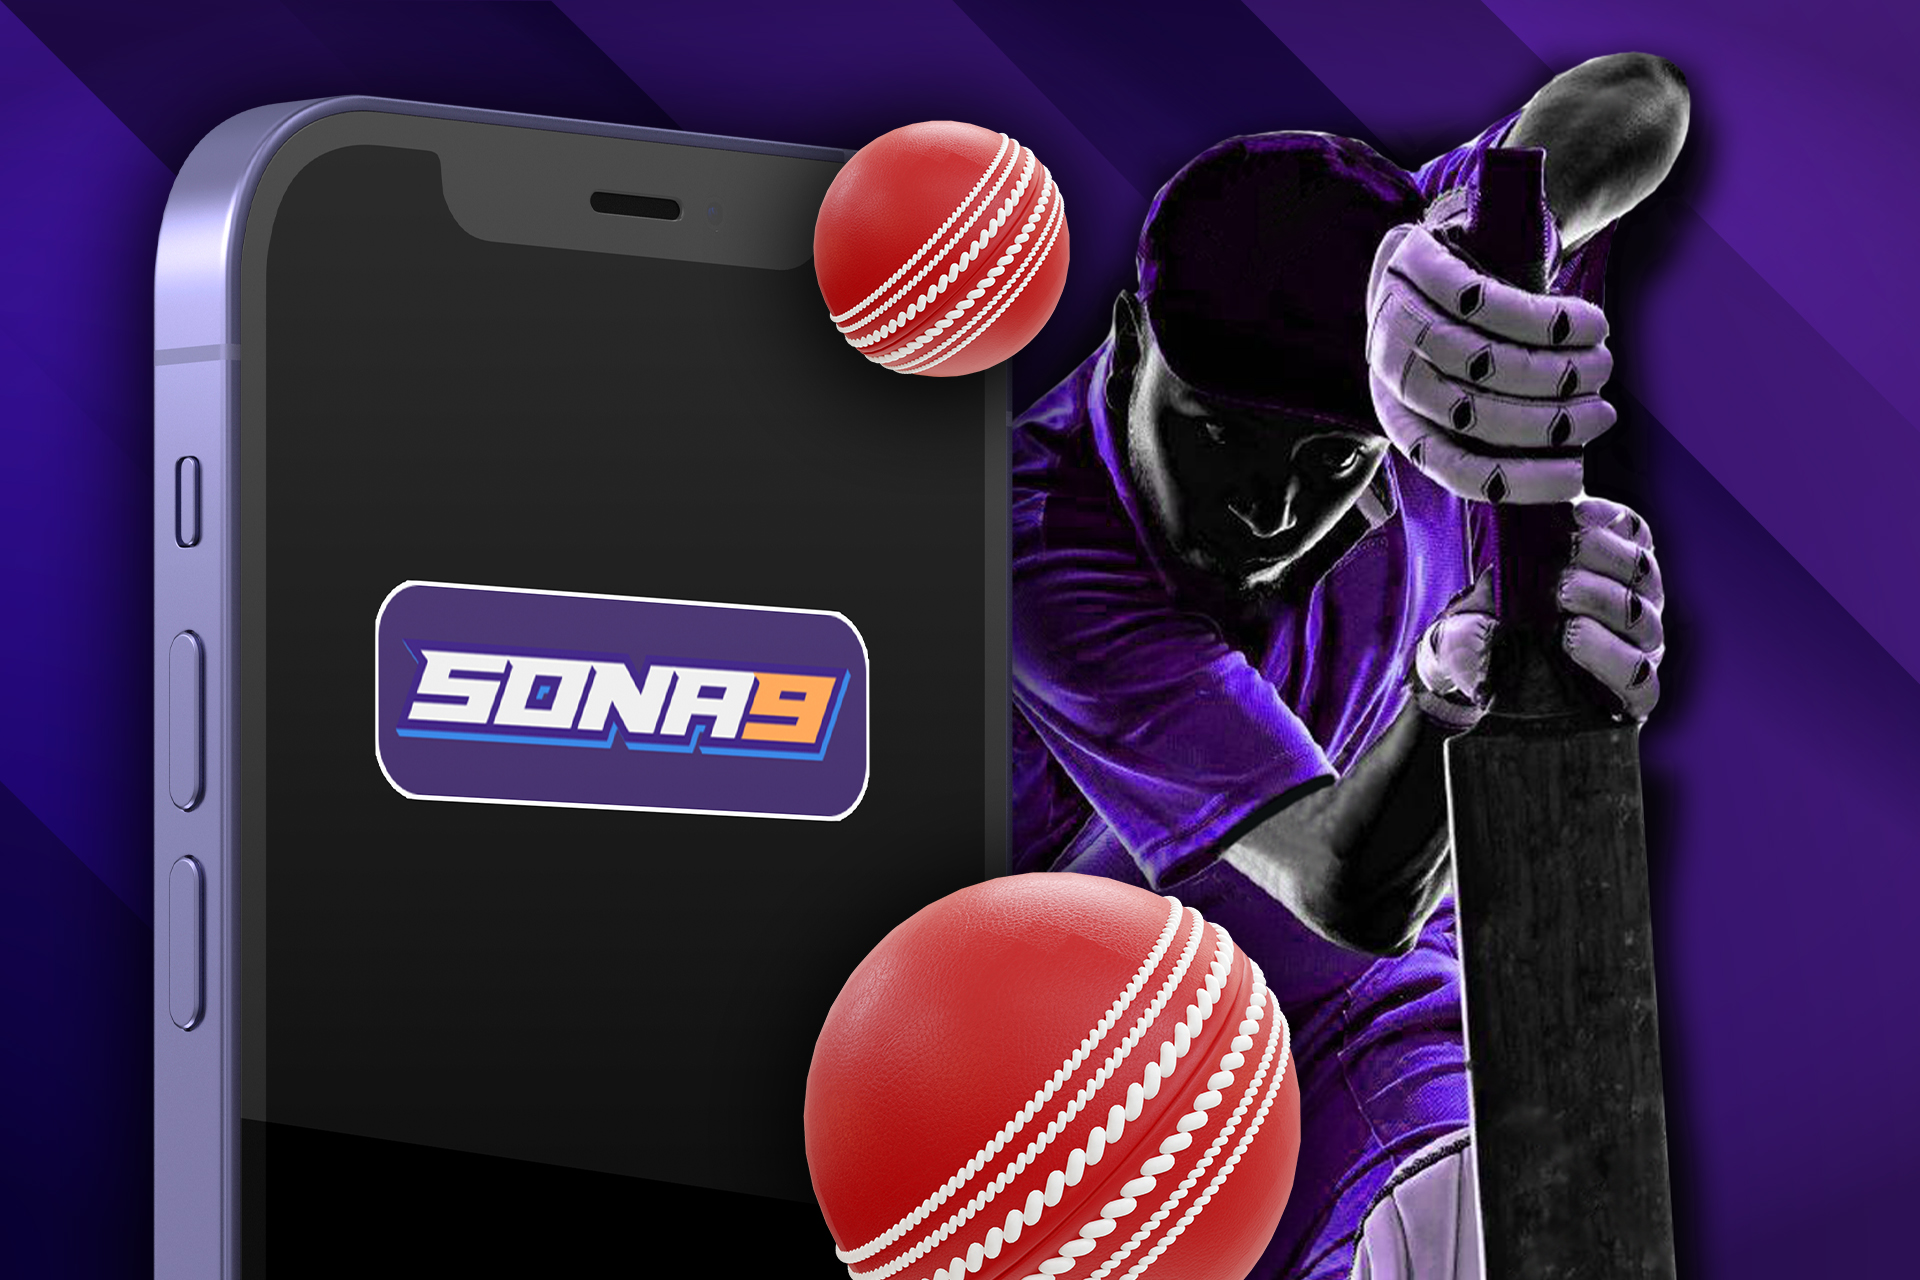 The Sona9 app allows you to place bets right on your smartphone.